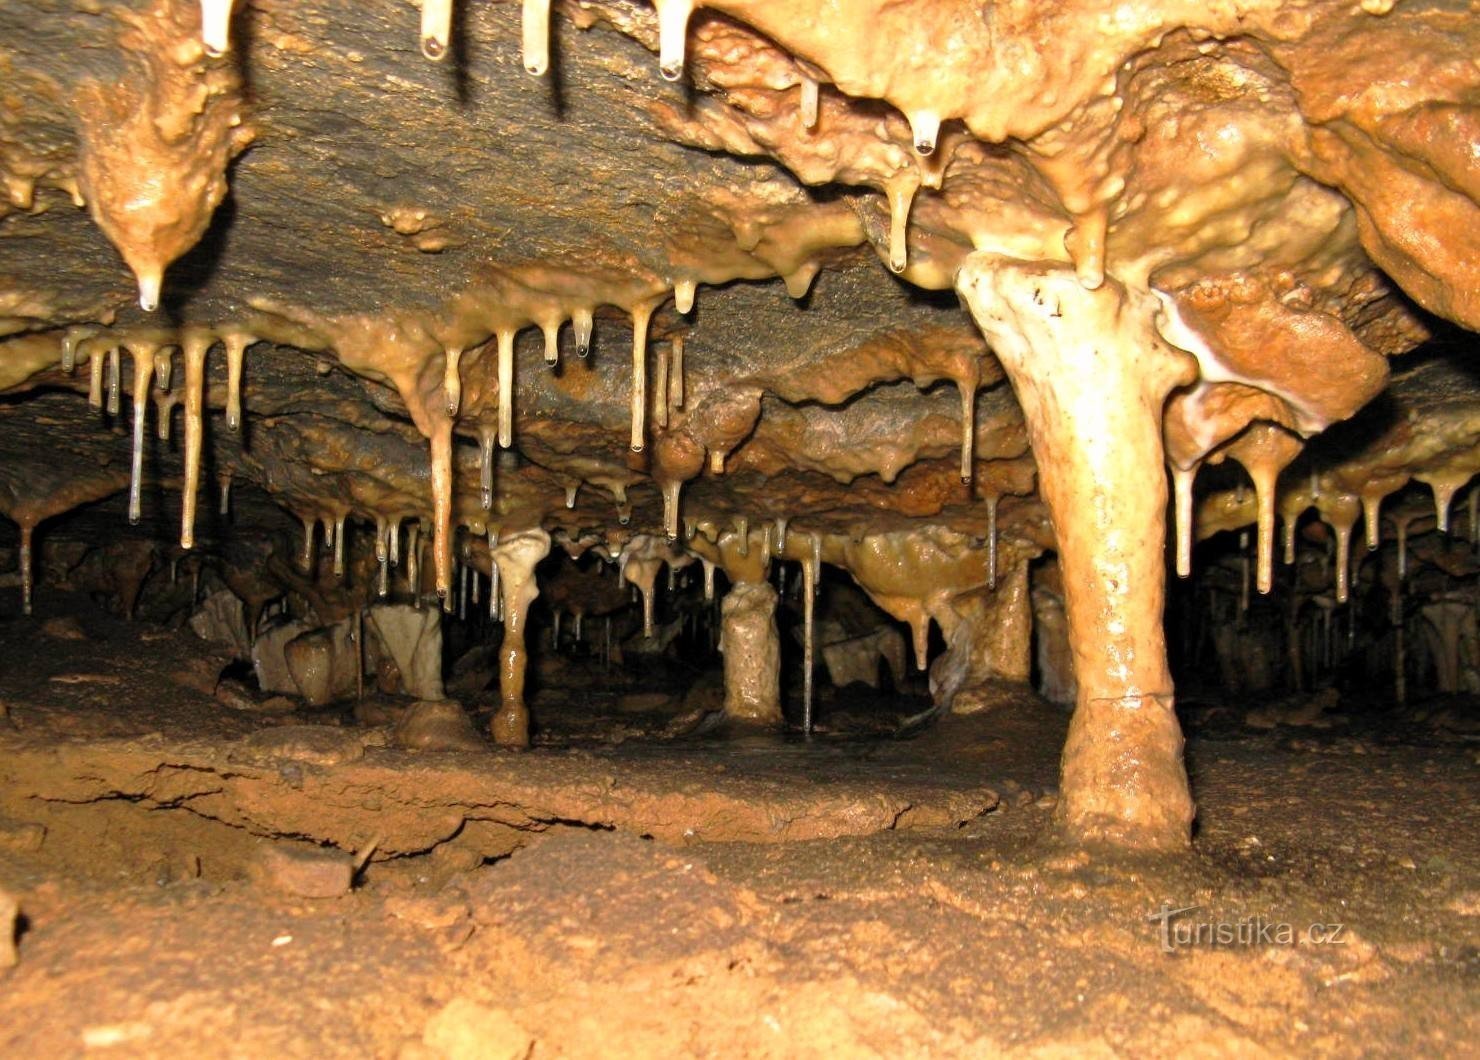 Stalactite decoration in the Holstein Cave